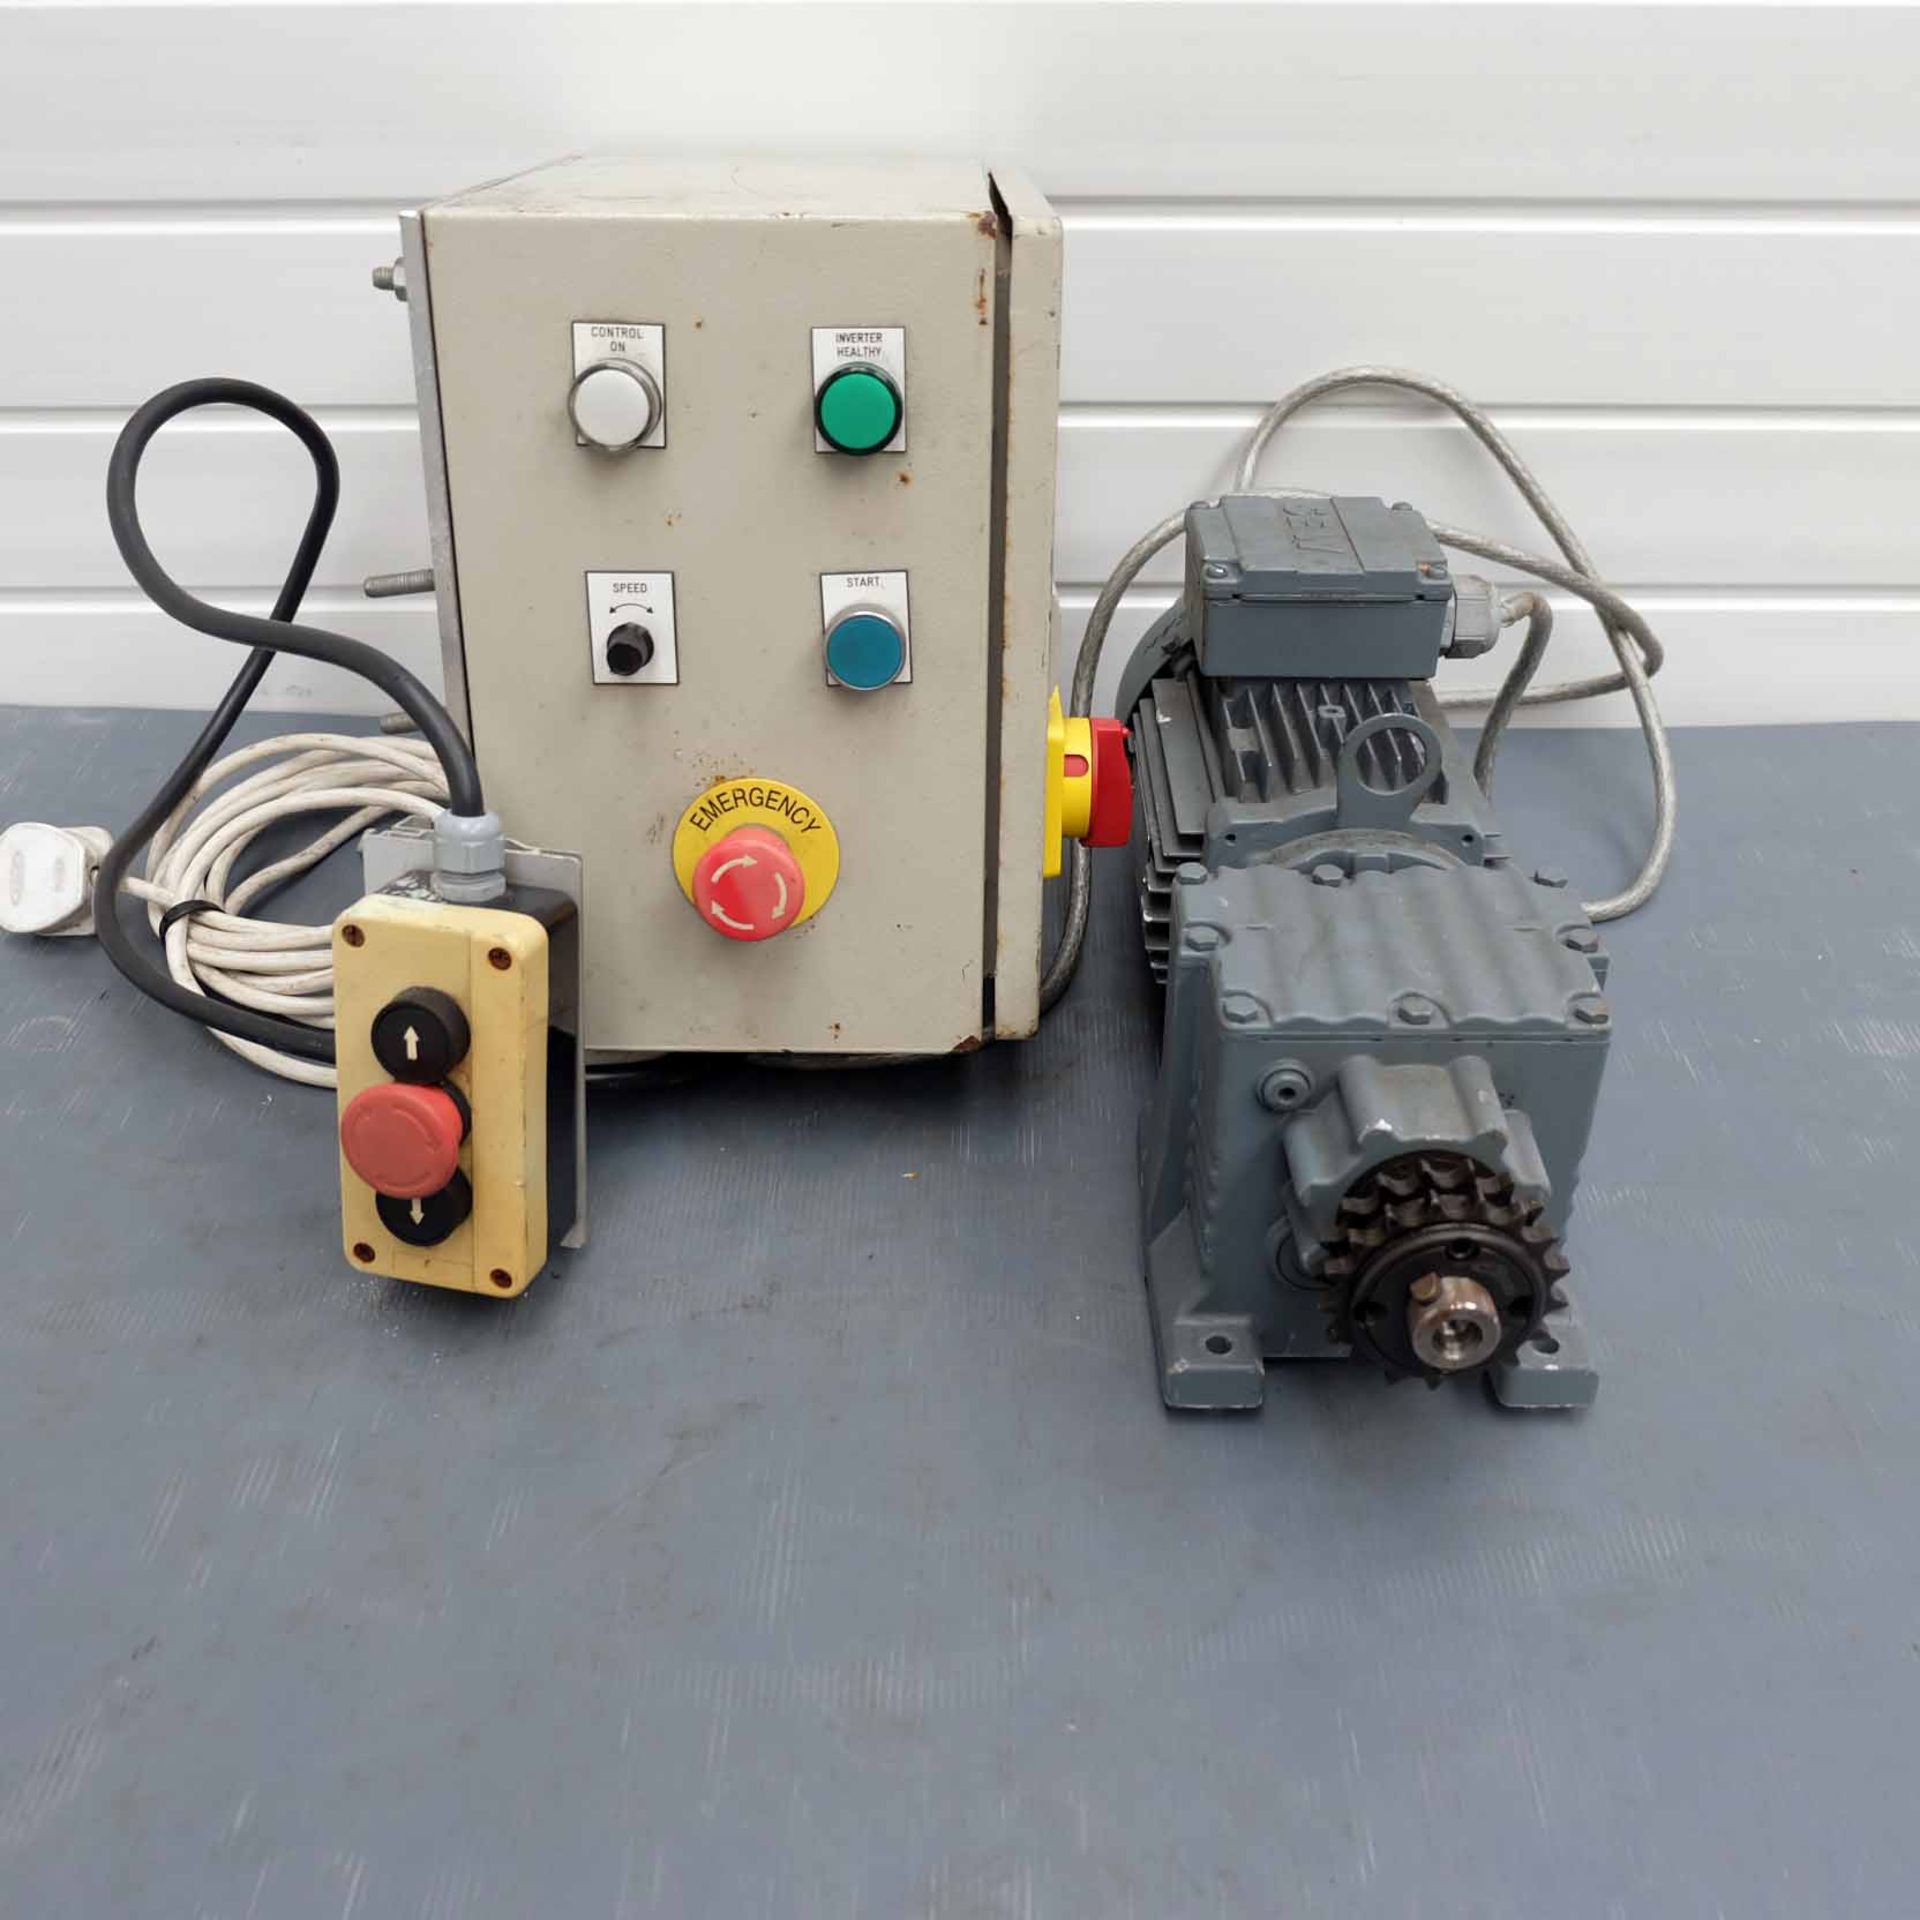 SEW Eurodrive Type R27 Motor & Gearbox With Electric Control Panel. Motor 0.55KW-S1. - Image 2 of 7